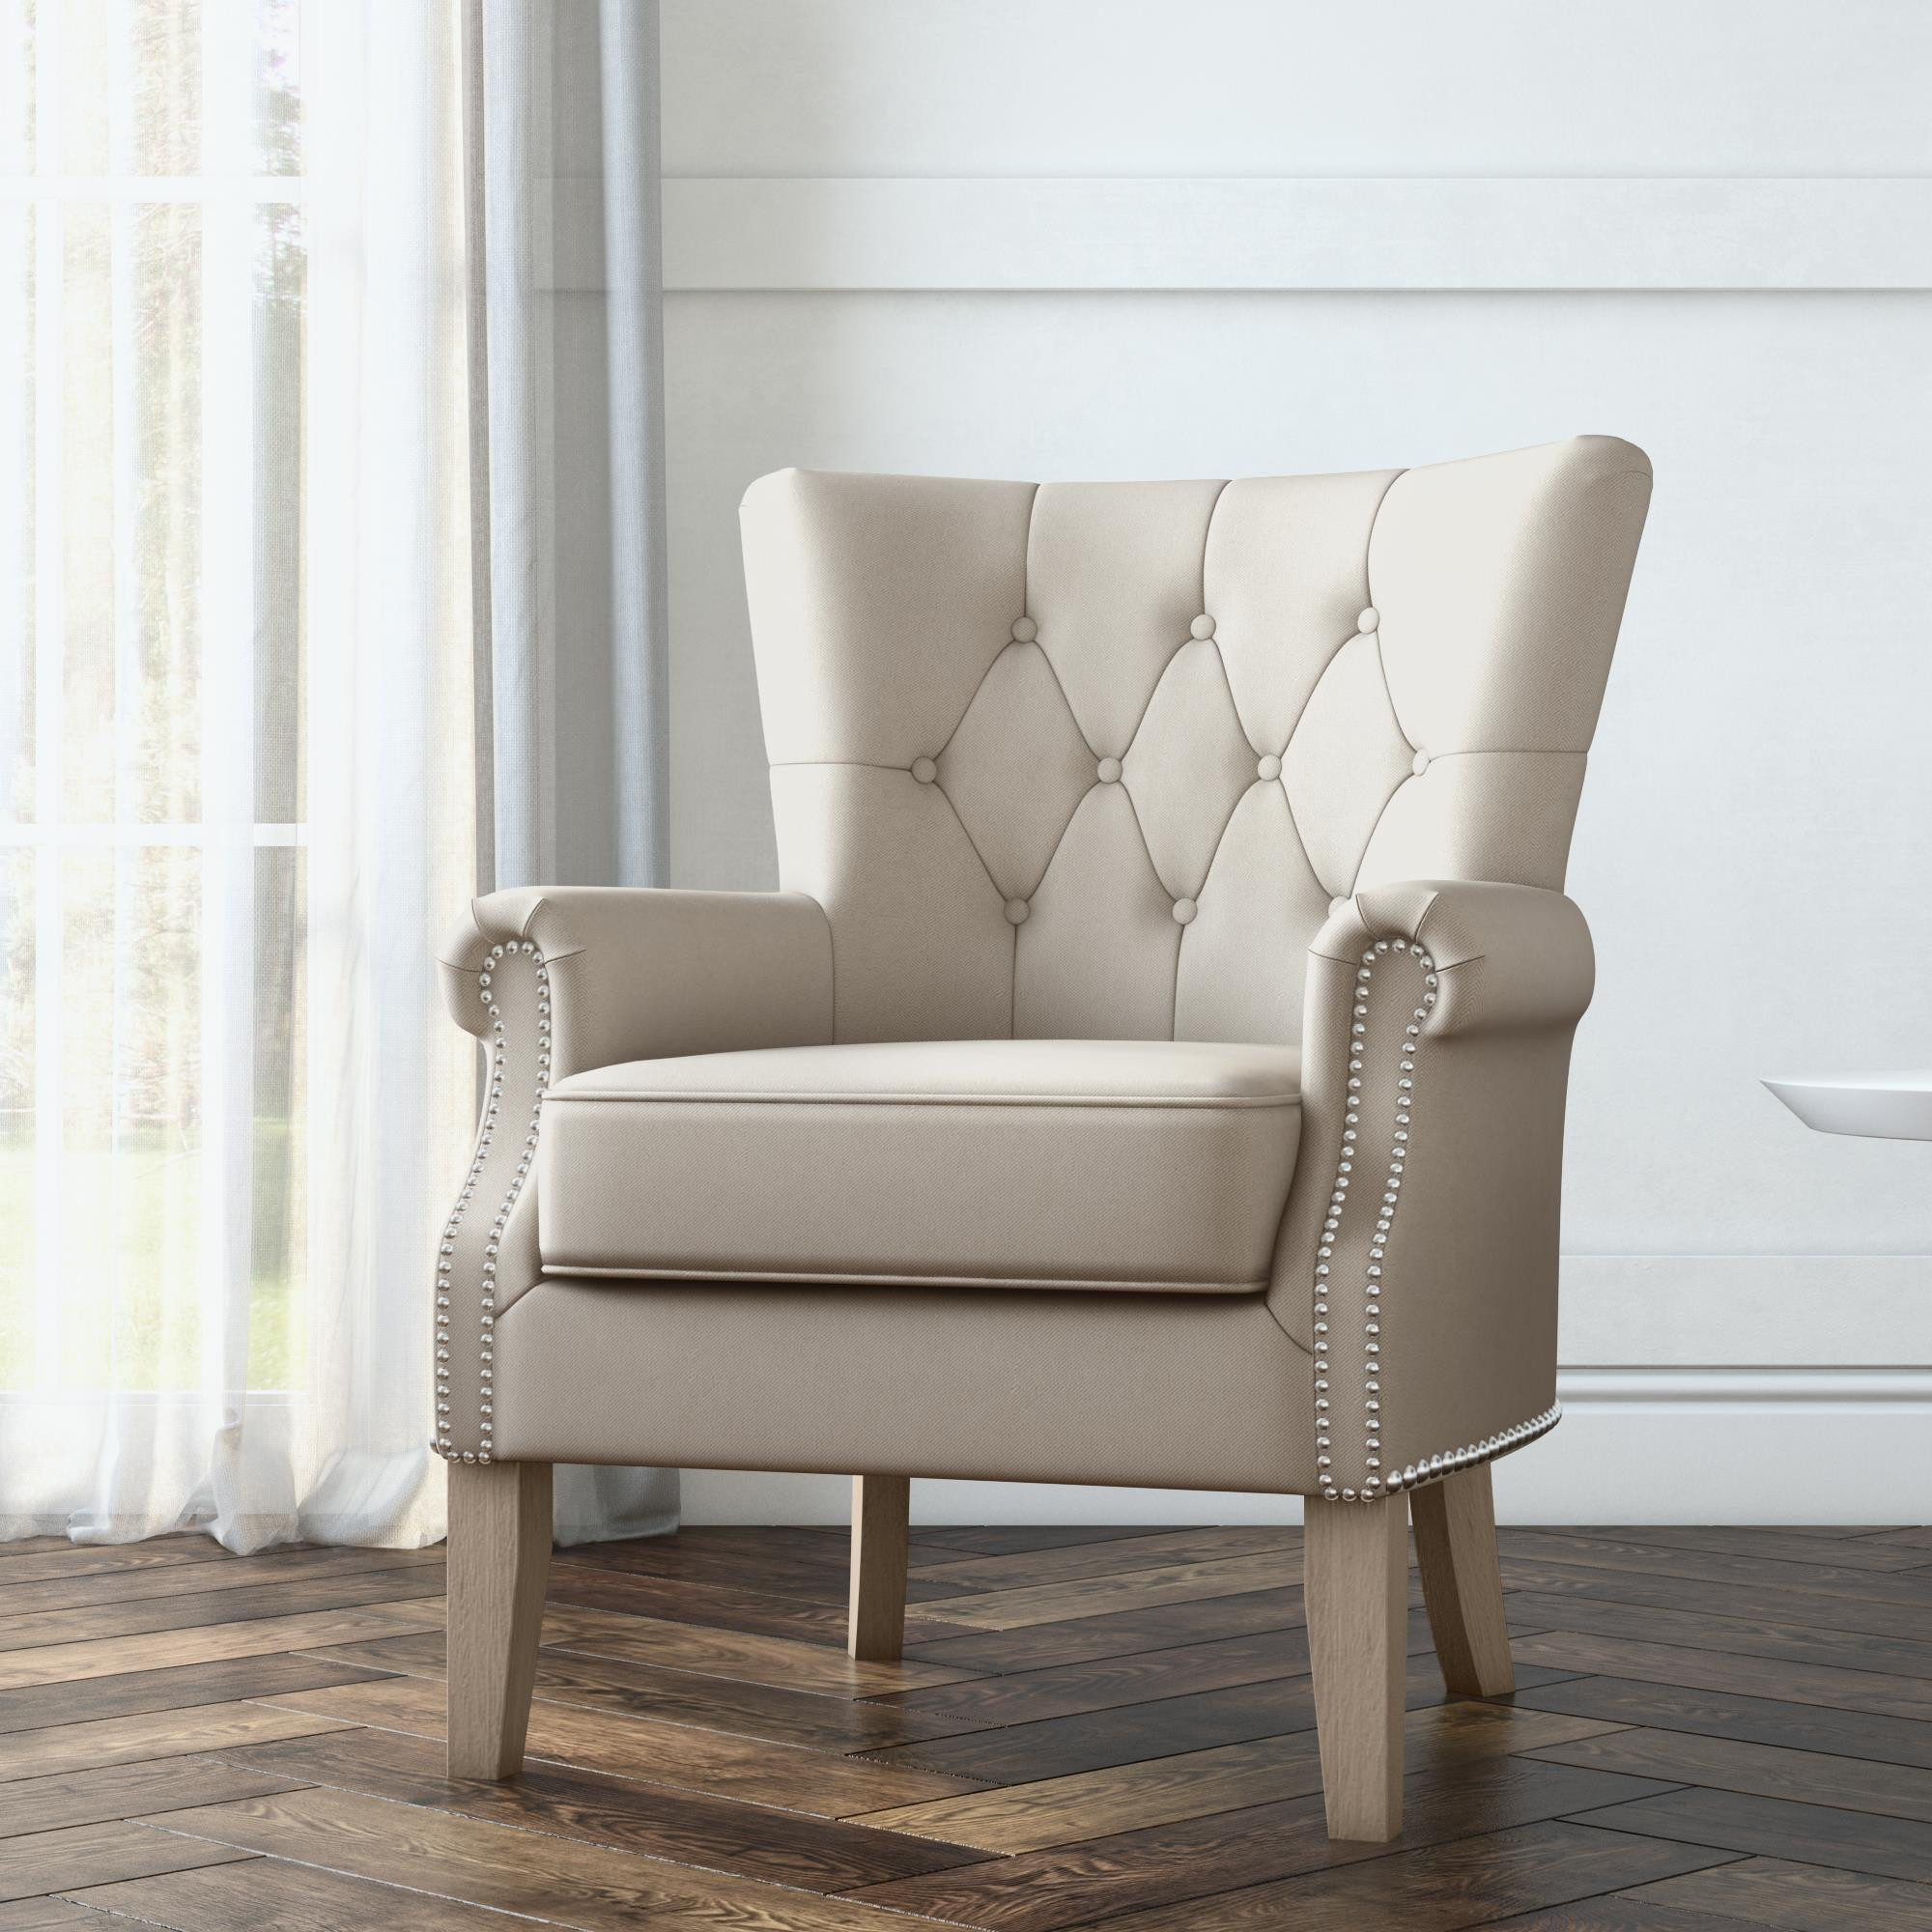 Walmart Living Room Chairs
 Better Homes & Gardens Accent Chair Living Room & Home